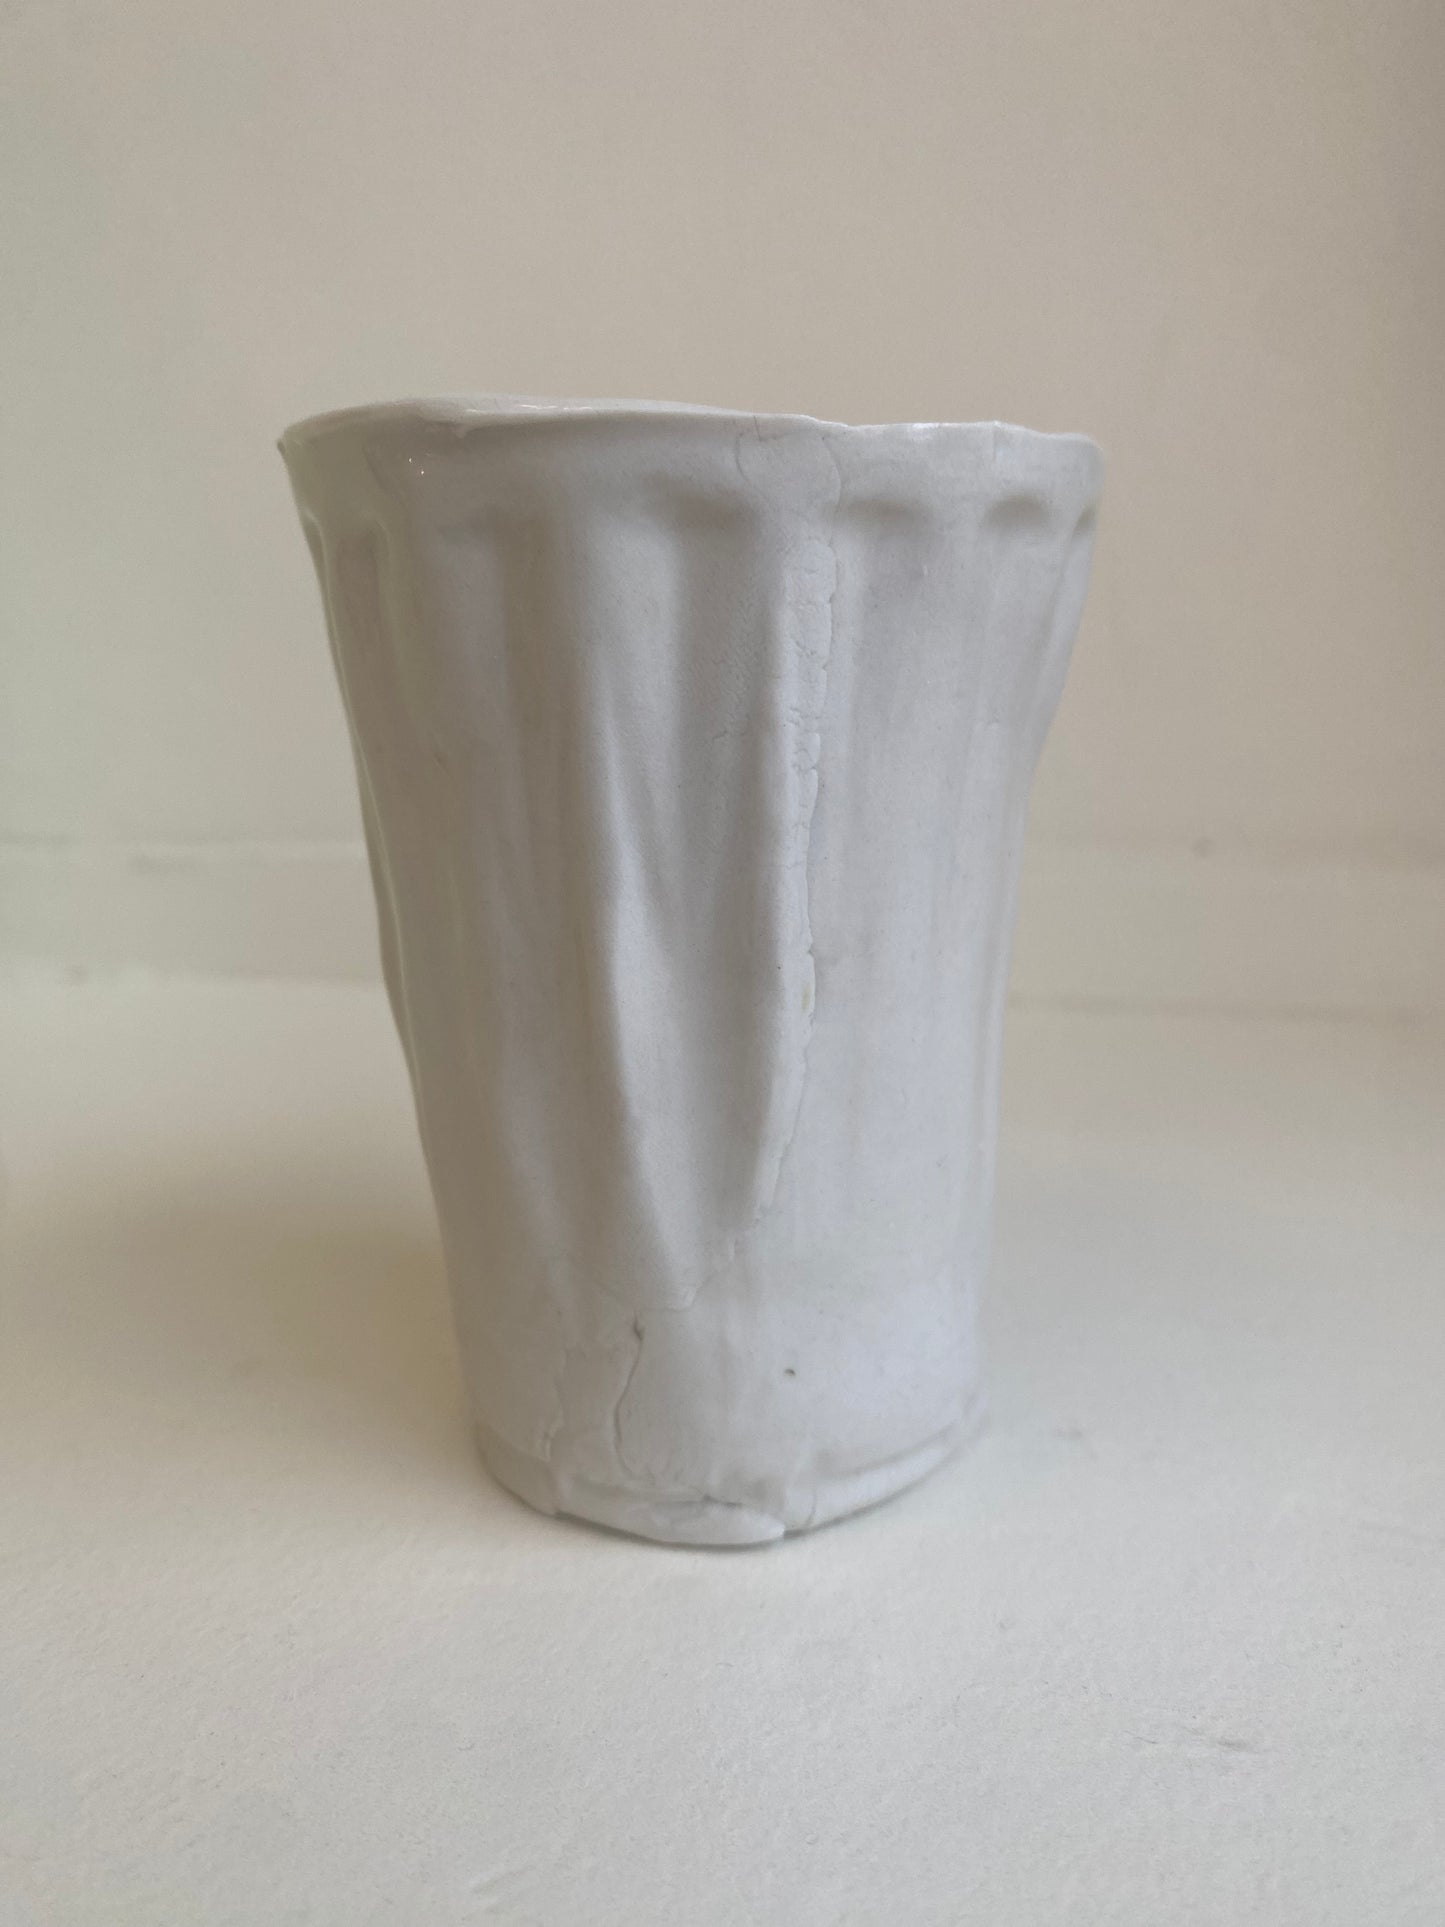 Cup from Recycled Plastic in Ceramic